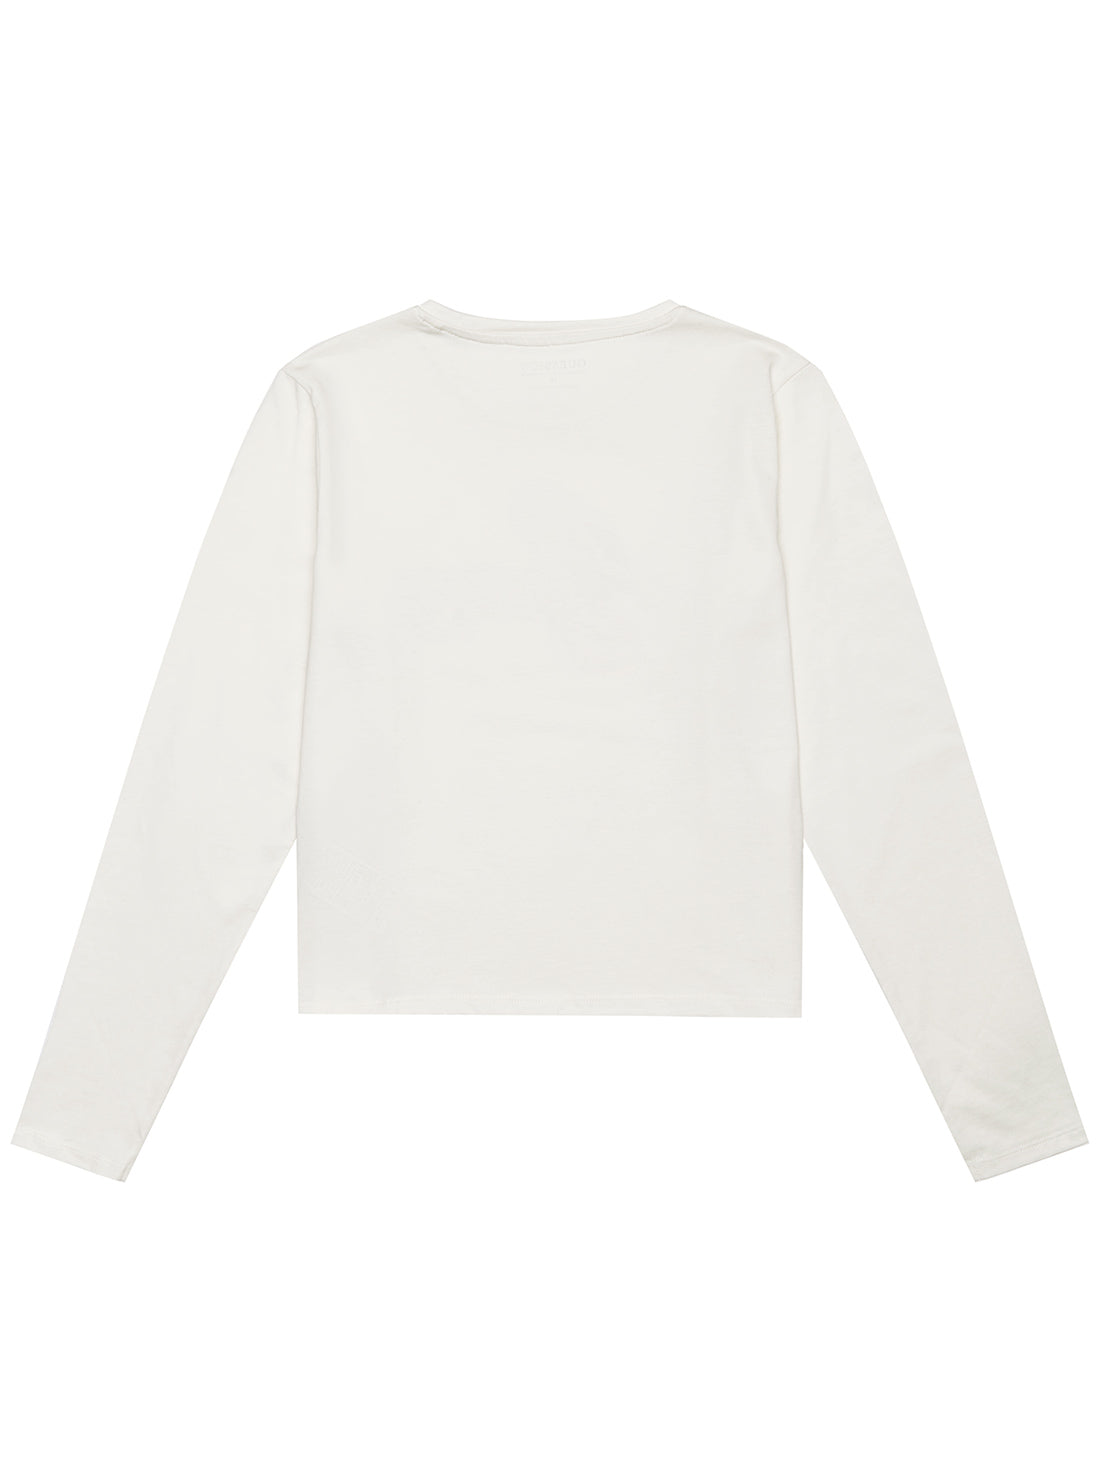 GUESS White Long Sleeve Crop T-Shirt (7-16) back view